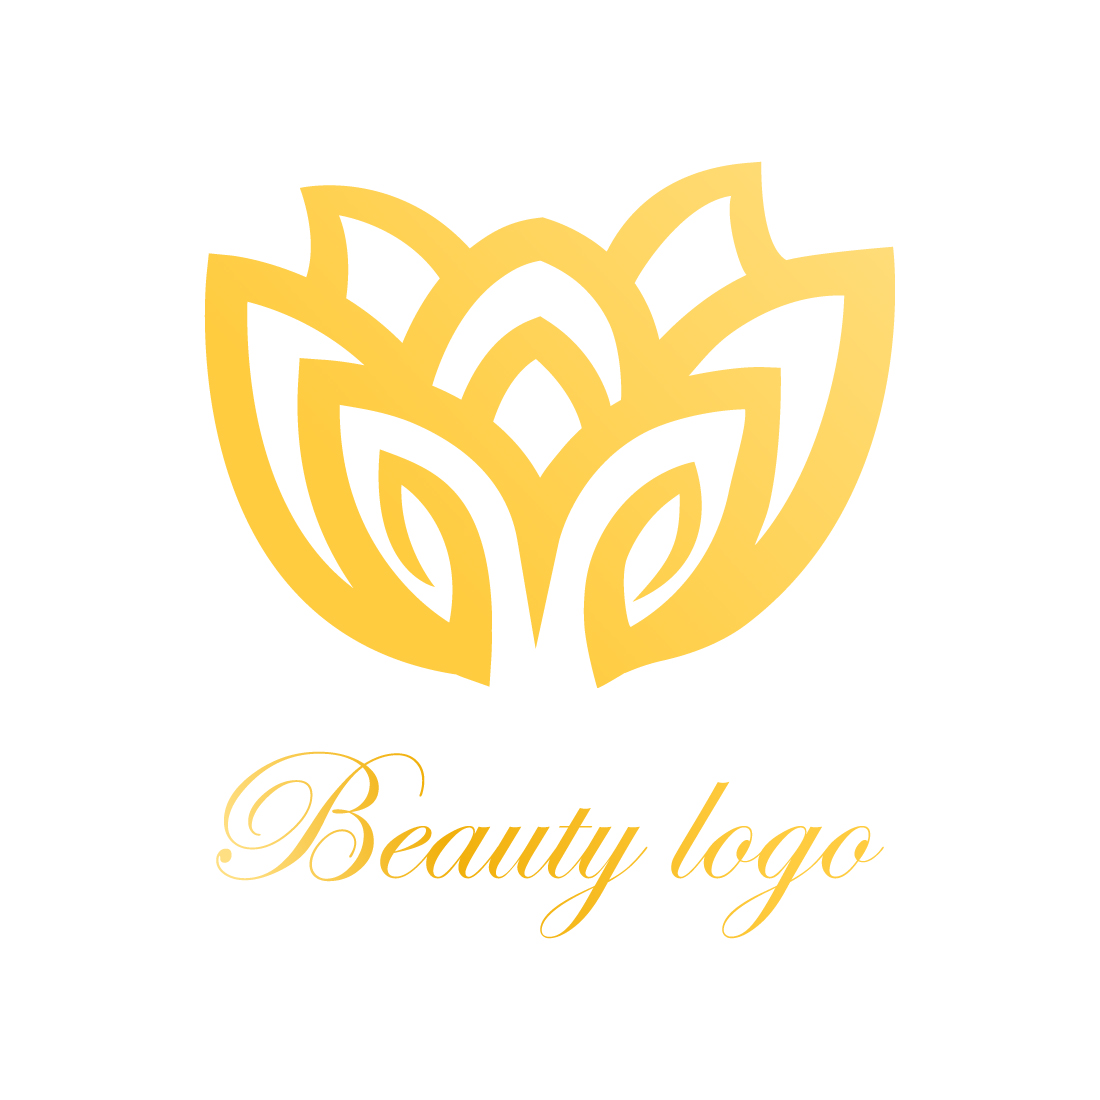 Beauty Flower logo design Marigold Flower logo design vector images Beautiful Lotas logo and Water lily icon template illustration preview image.